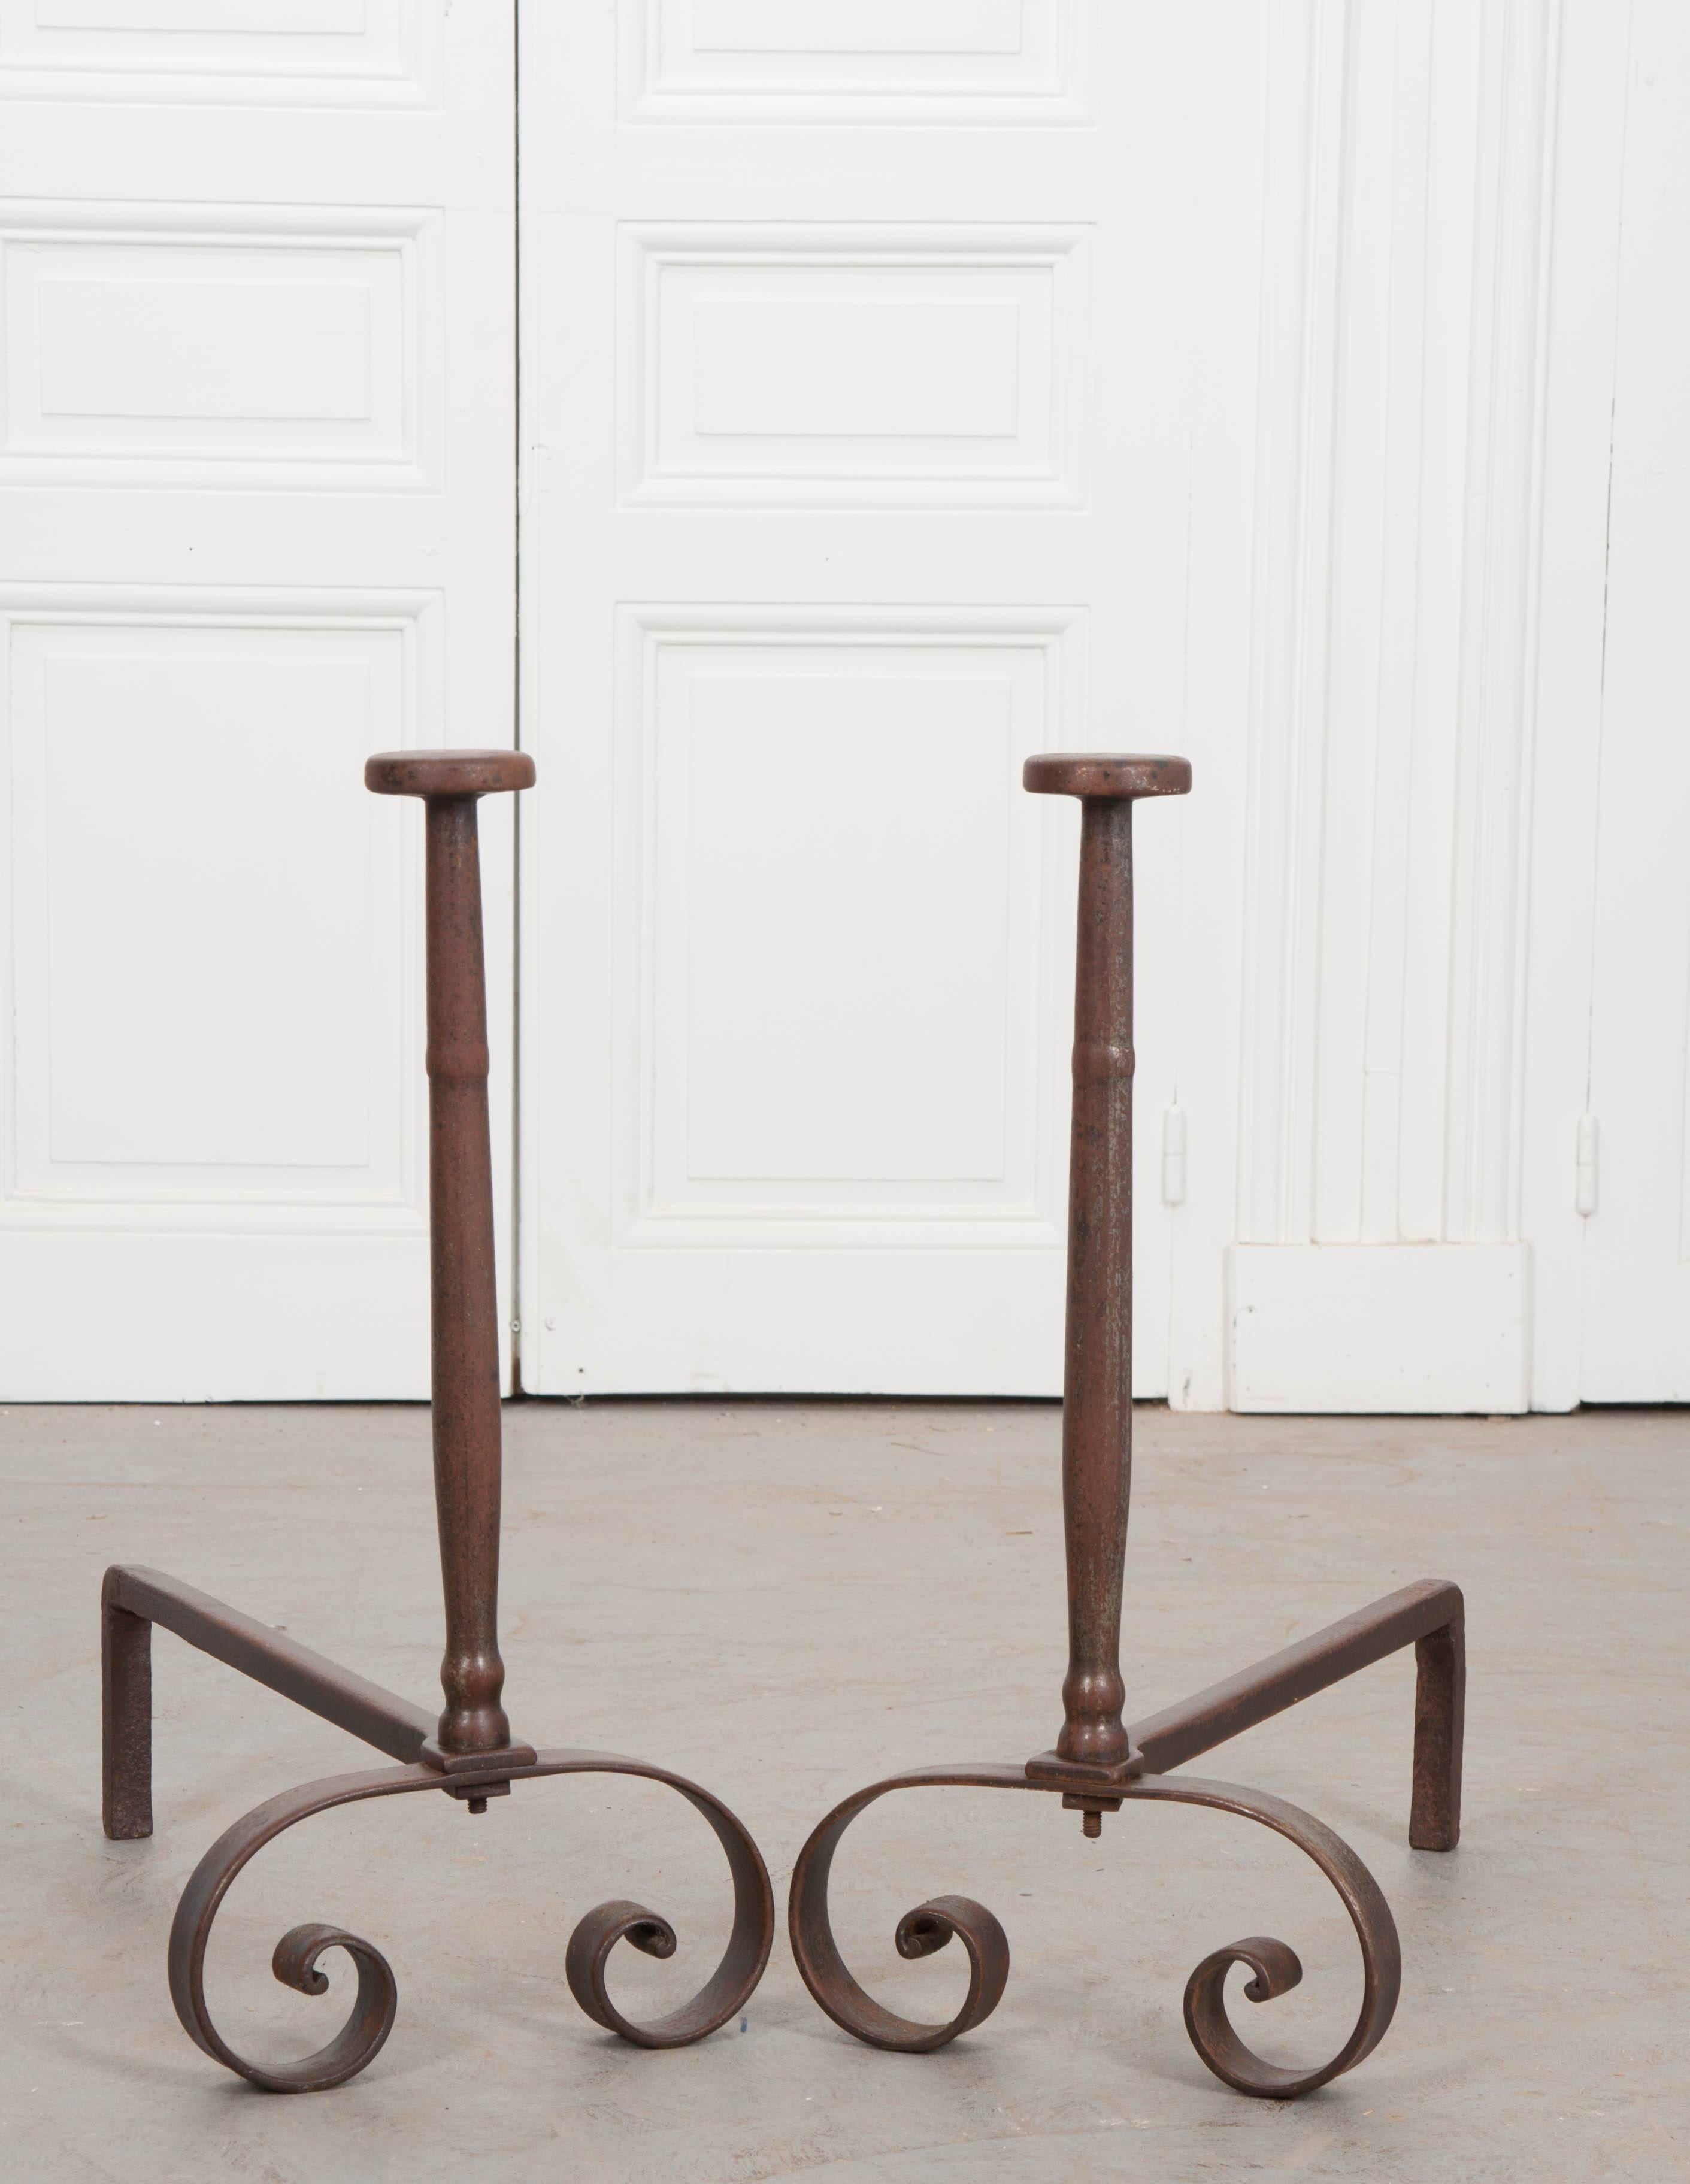 A wonderful pair of column-form heavy iron andirons, made in France during the 19th century. The iron has taken on a lovely patina thanks to years of fires enjoyed by the andiron’s previous owner. The design is conservative and classic, with